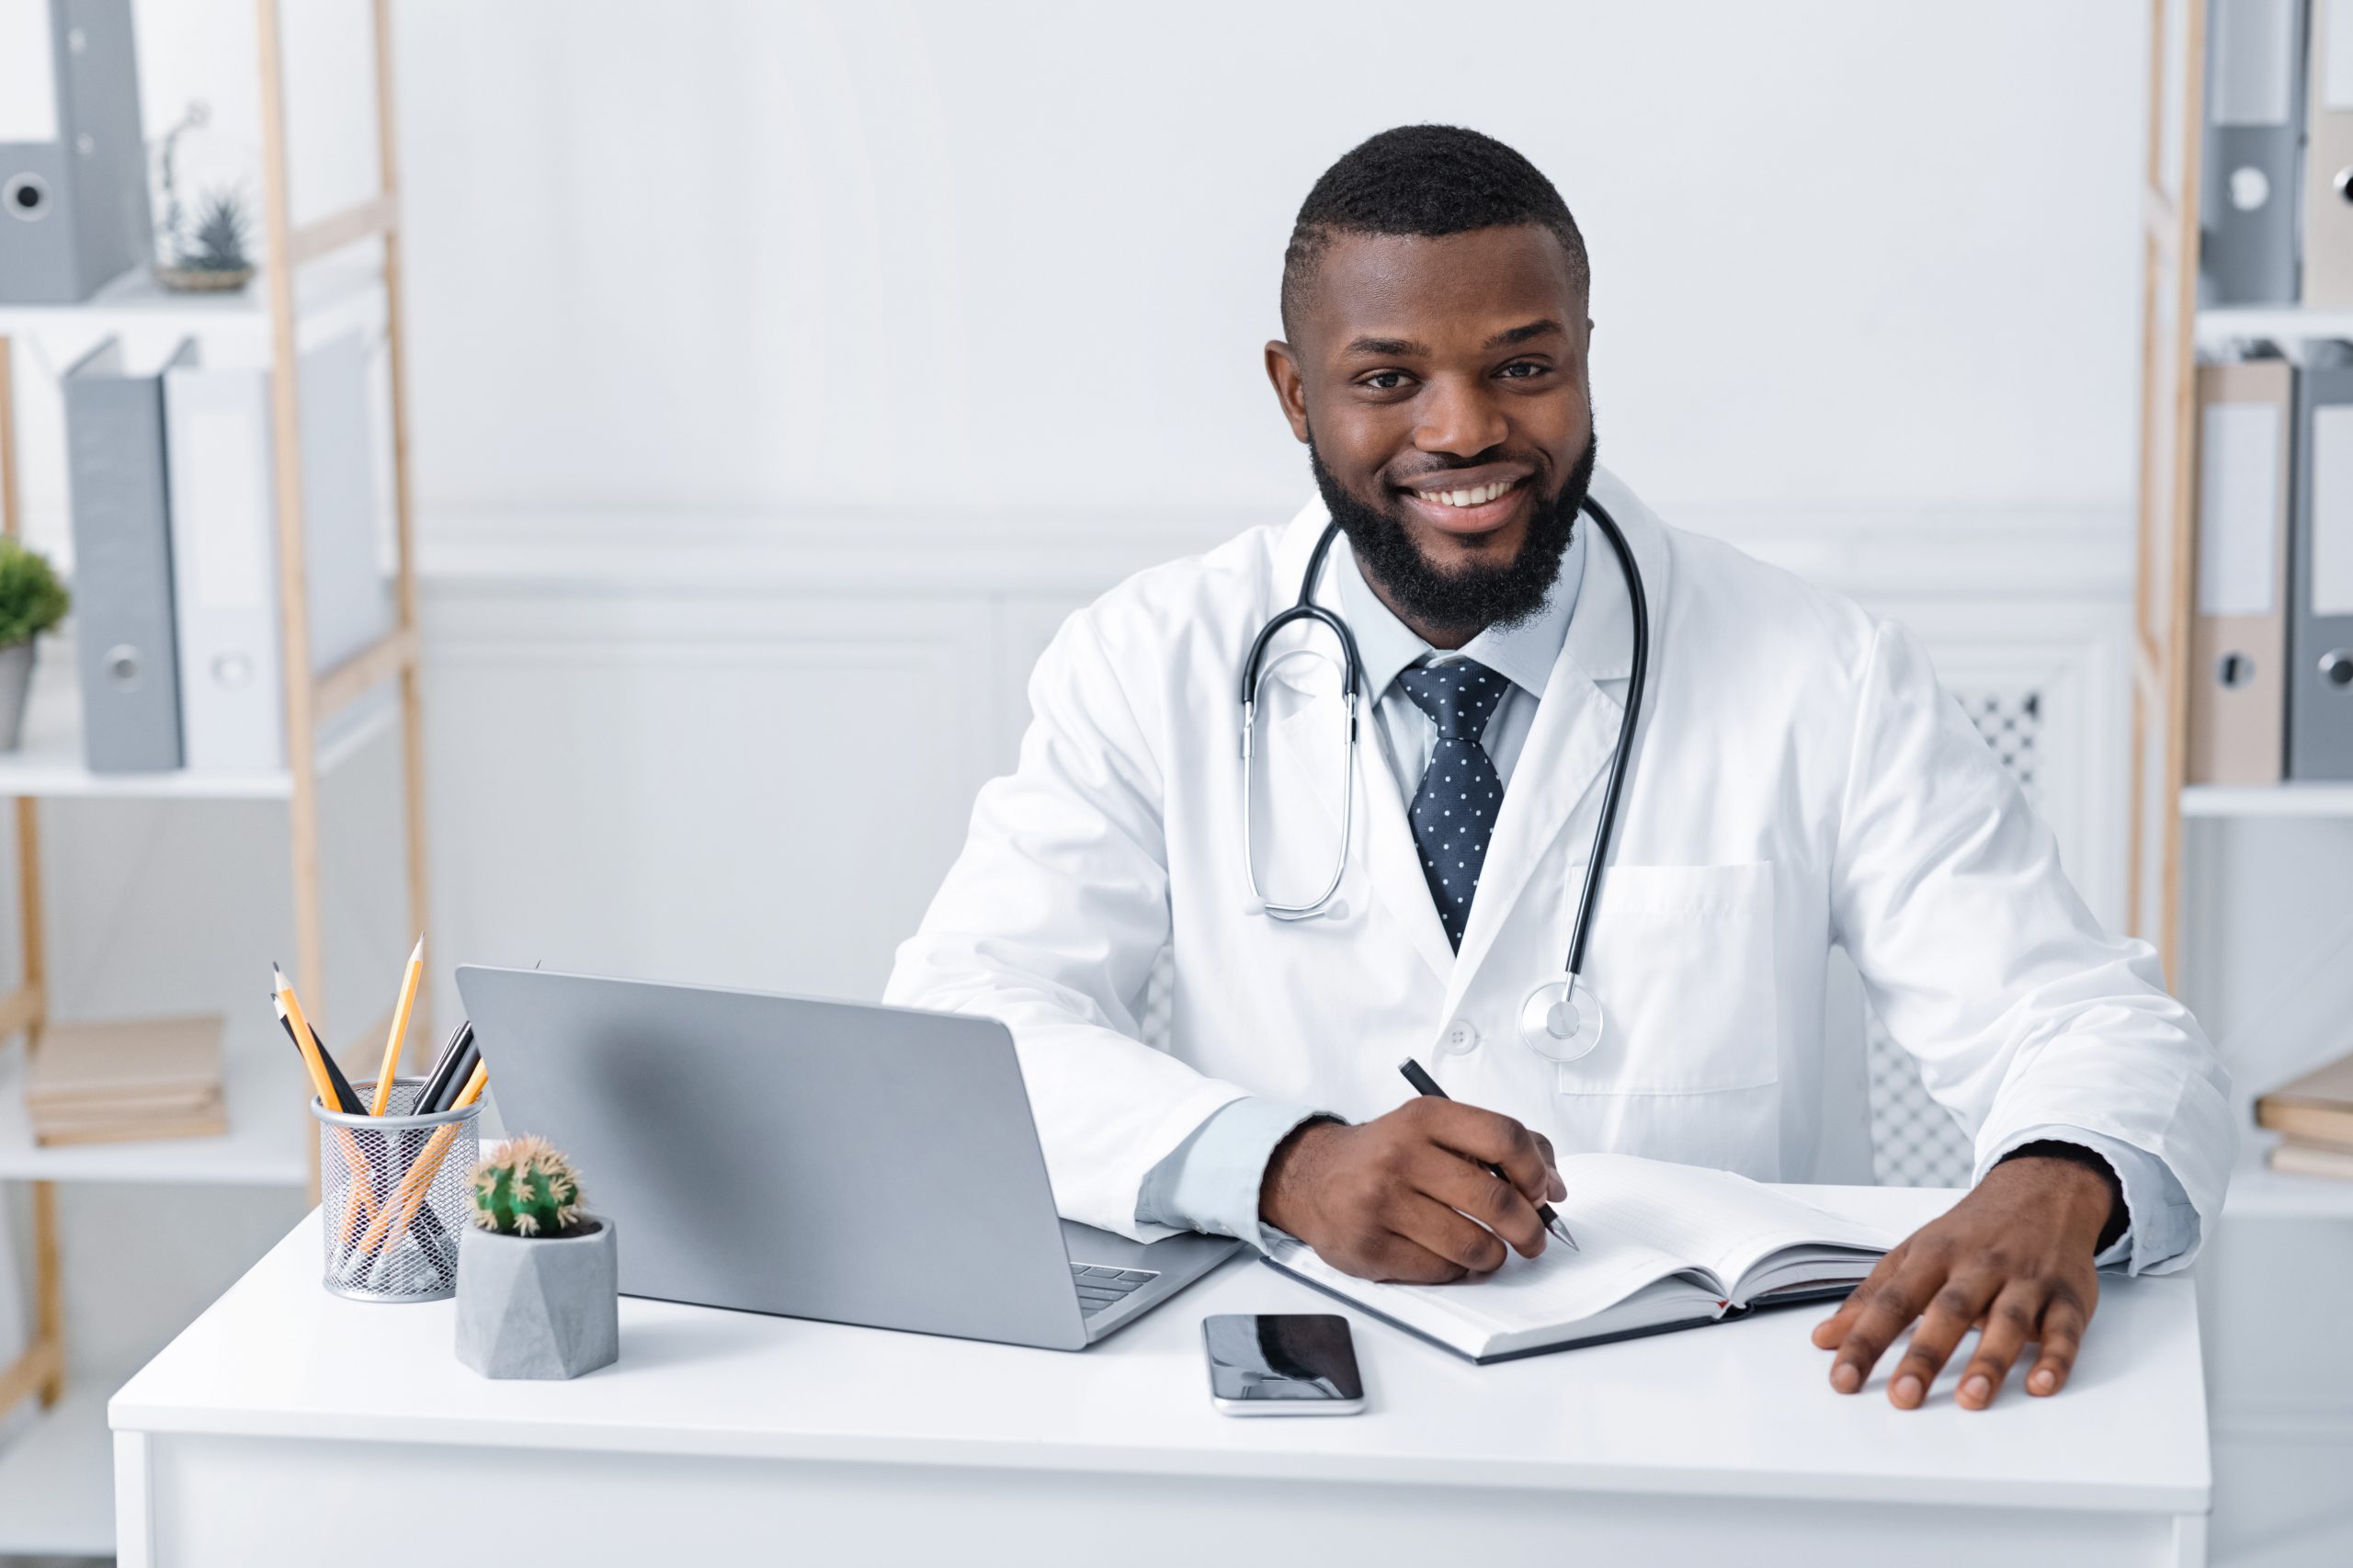 https://www.authx.com/wp-content/uploads/2022/02/A-doctor-showing-happiness-in-using-EHR-services.jpg